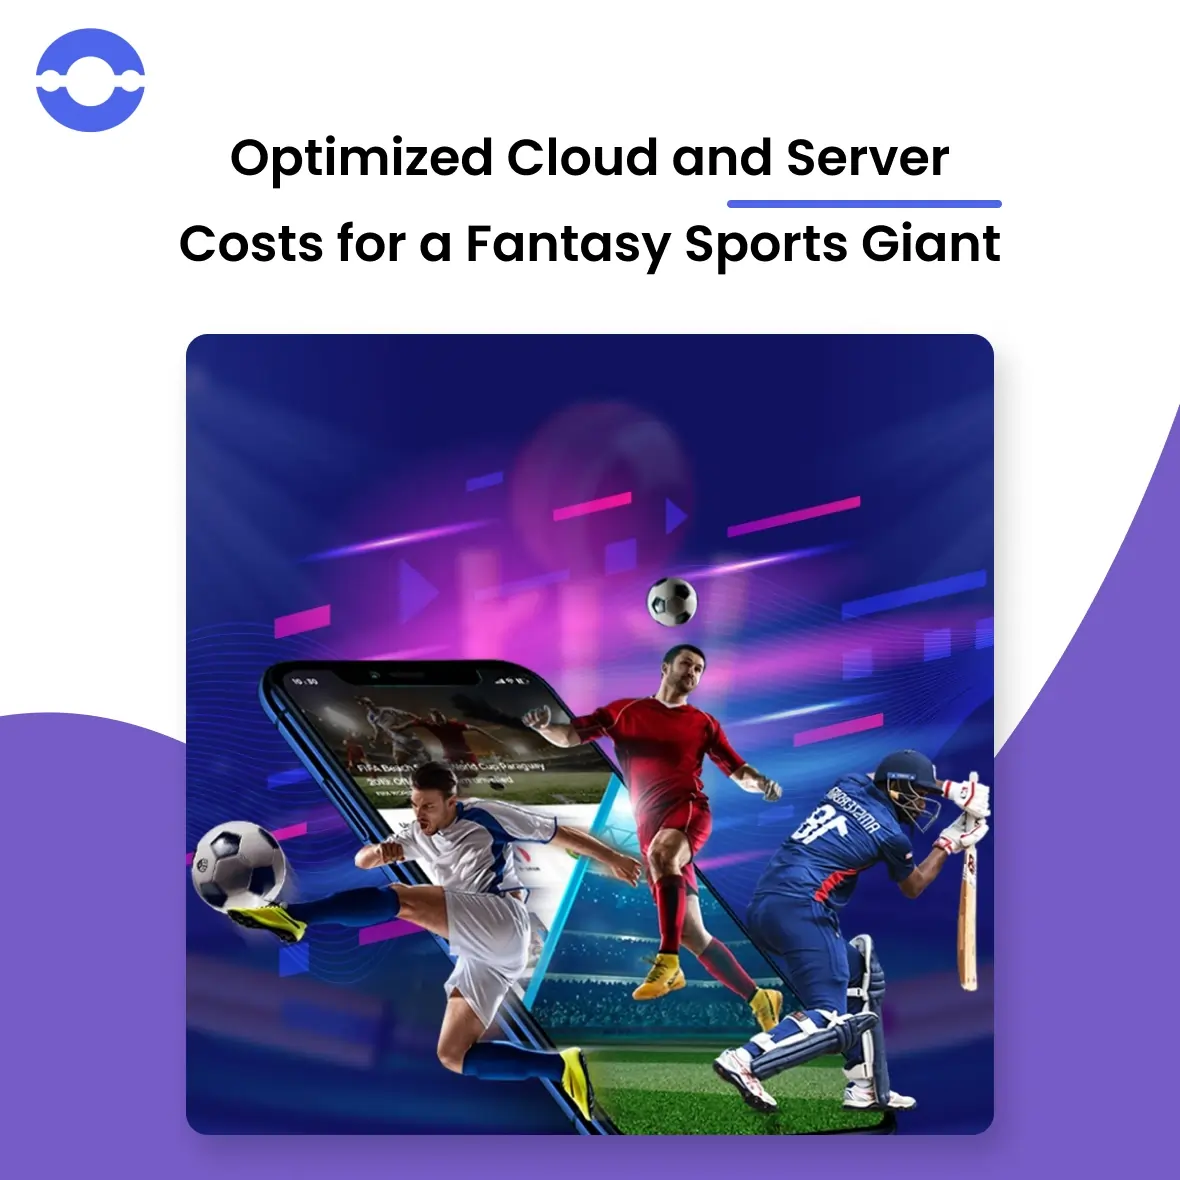 Optimizing Cloud and Server Costs for a Fantasy Sports Giant